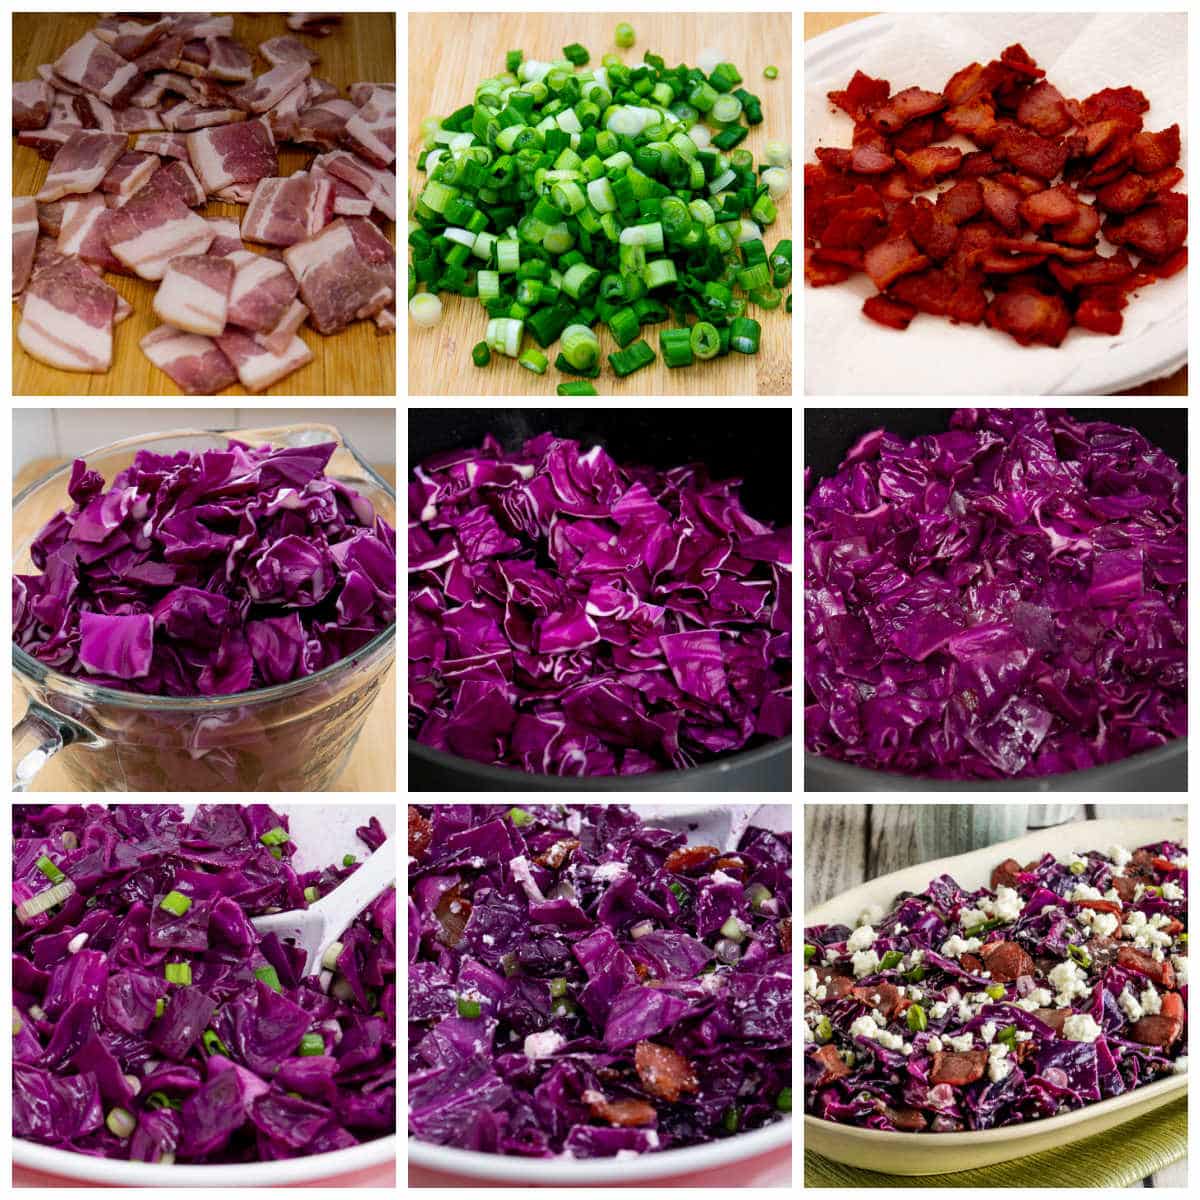 Collage of Red Cabbage Salad Recipe Steps with Bacon and Goat Cheese